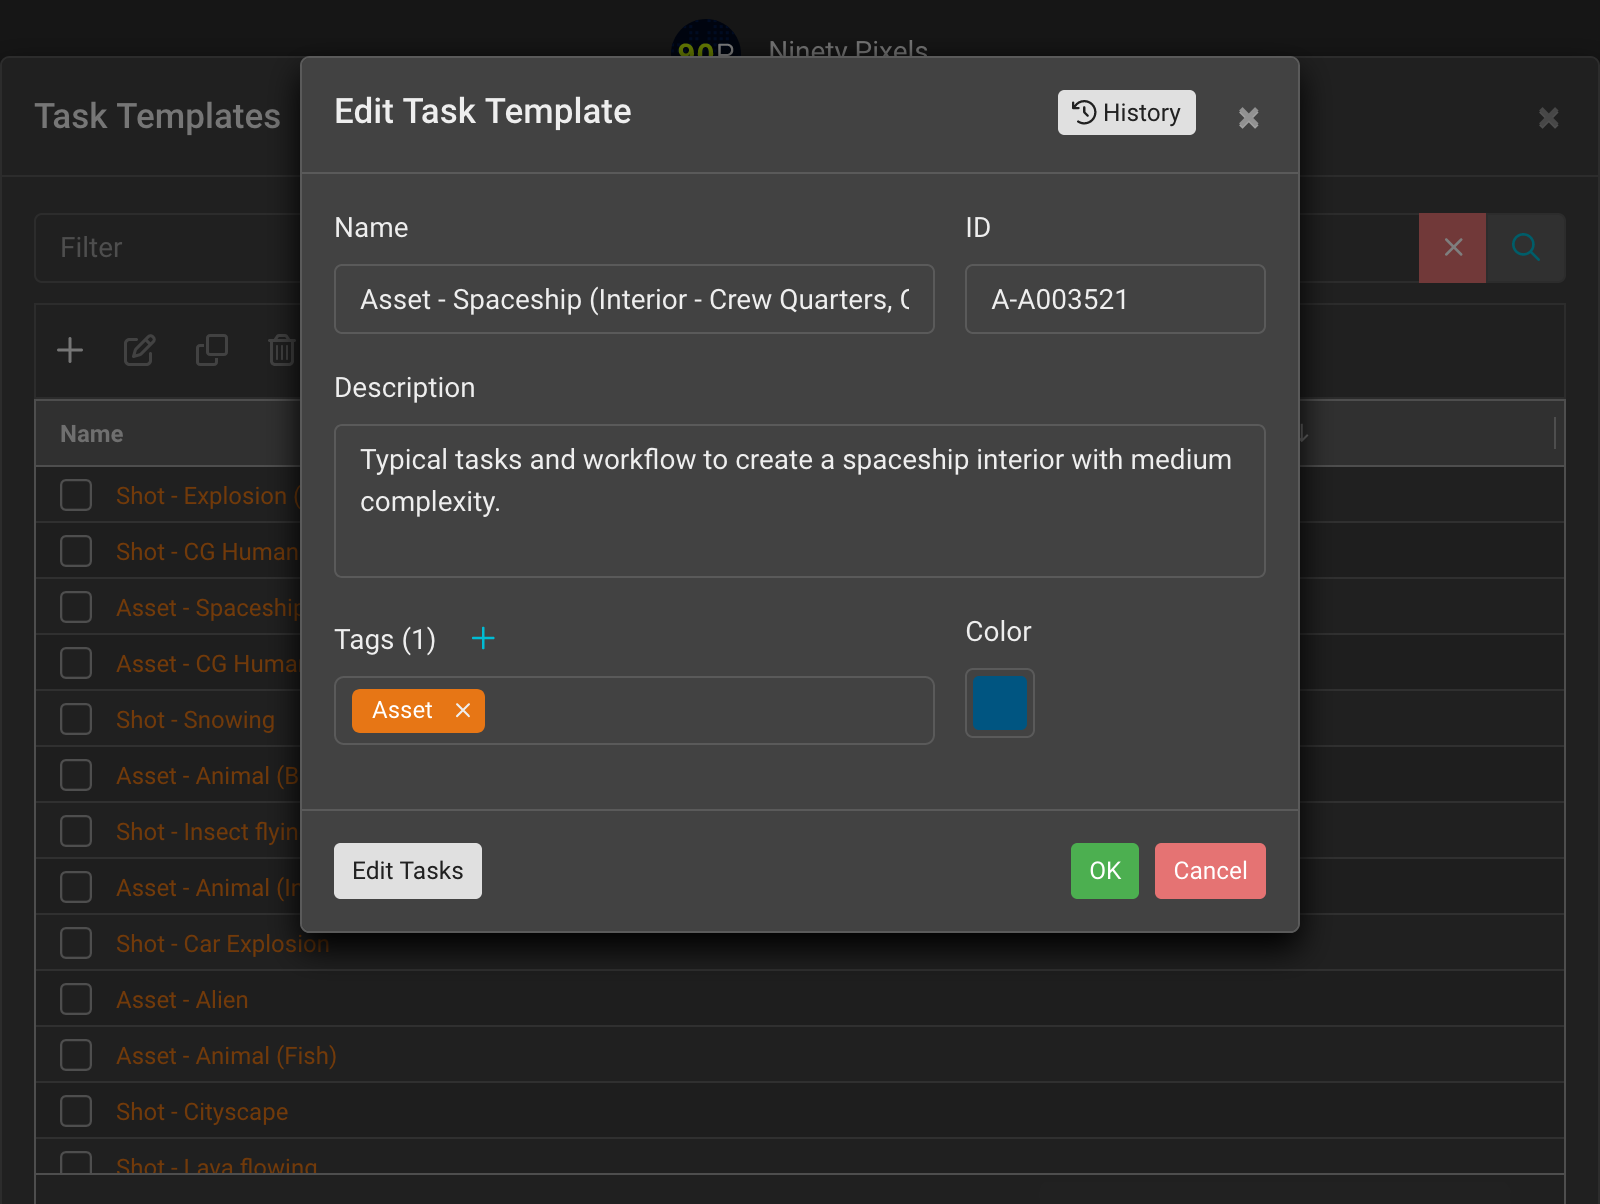 Task templates capture project knowledge